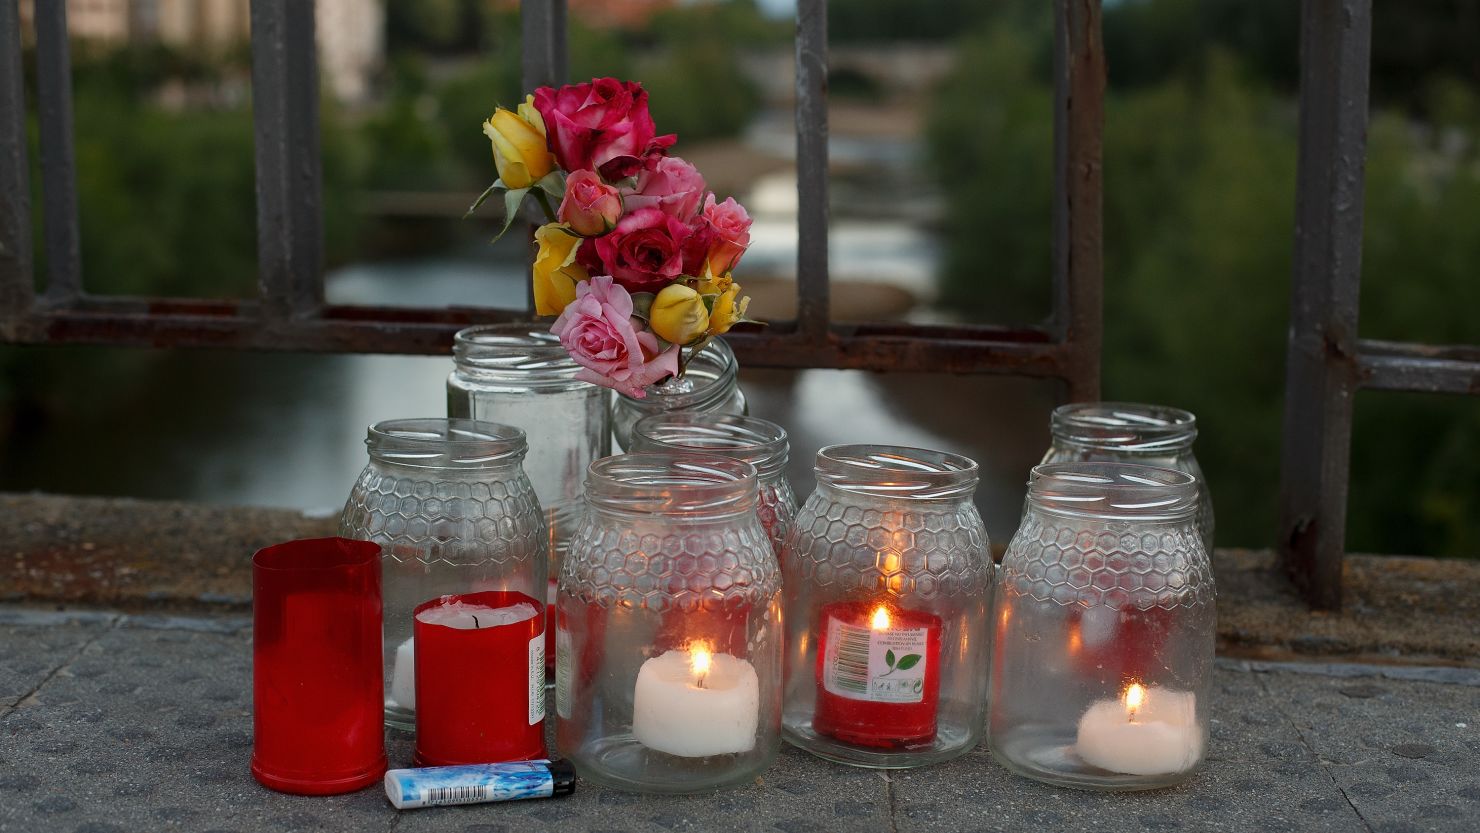  Flowers and candles lay on the bridge where Isabel Carrasco was killed on May 13, 2014 in Leon, Spain.